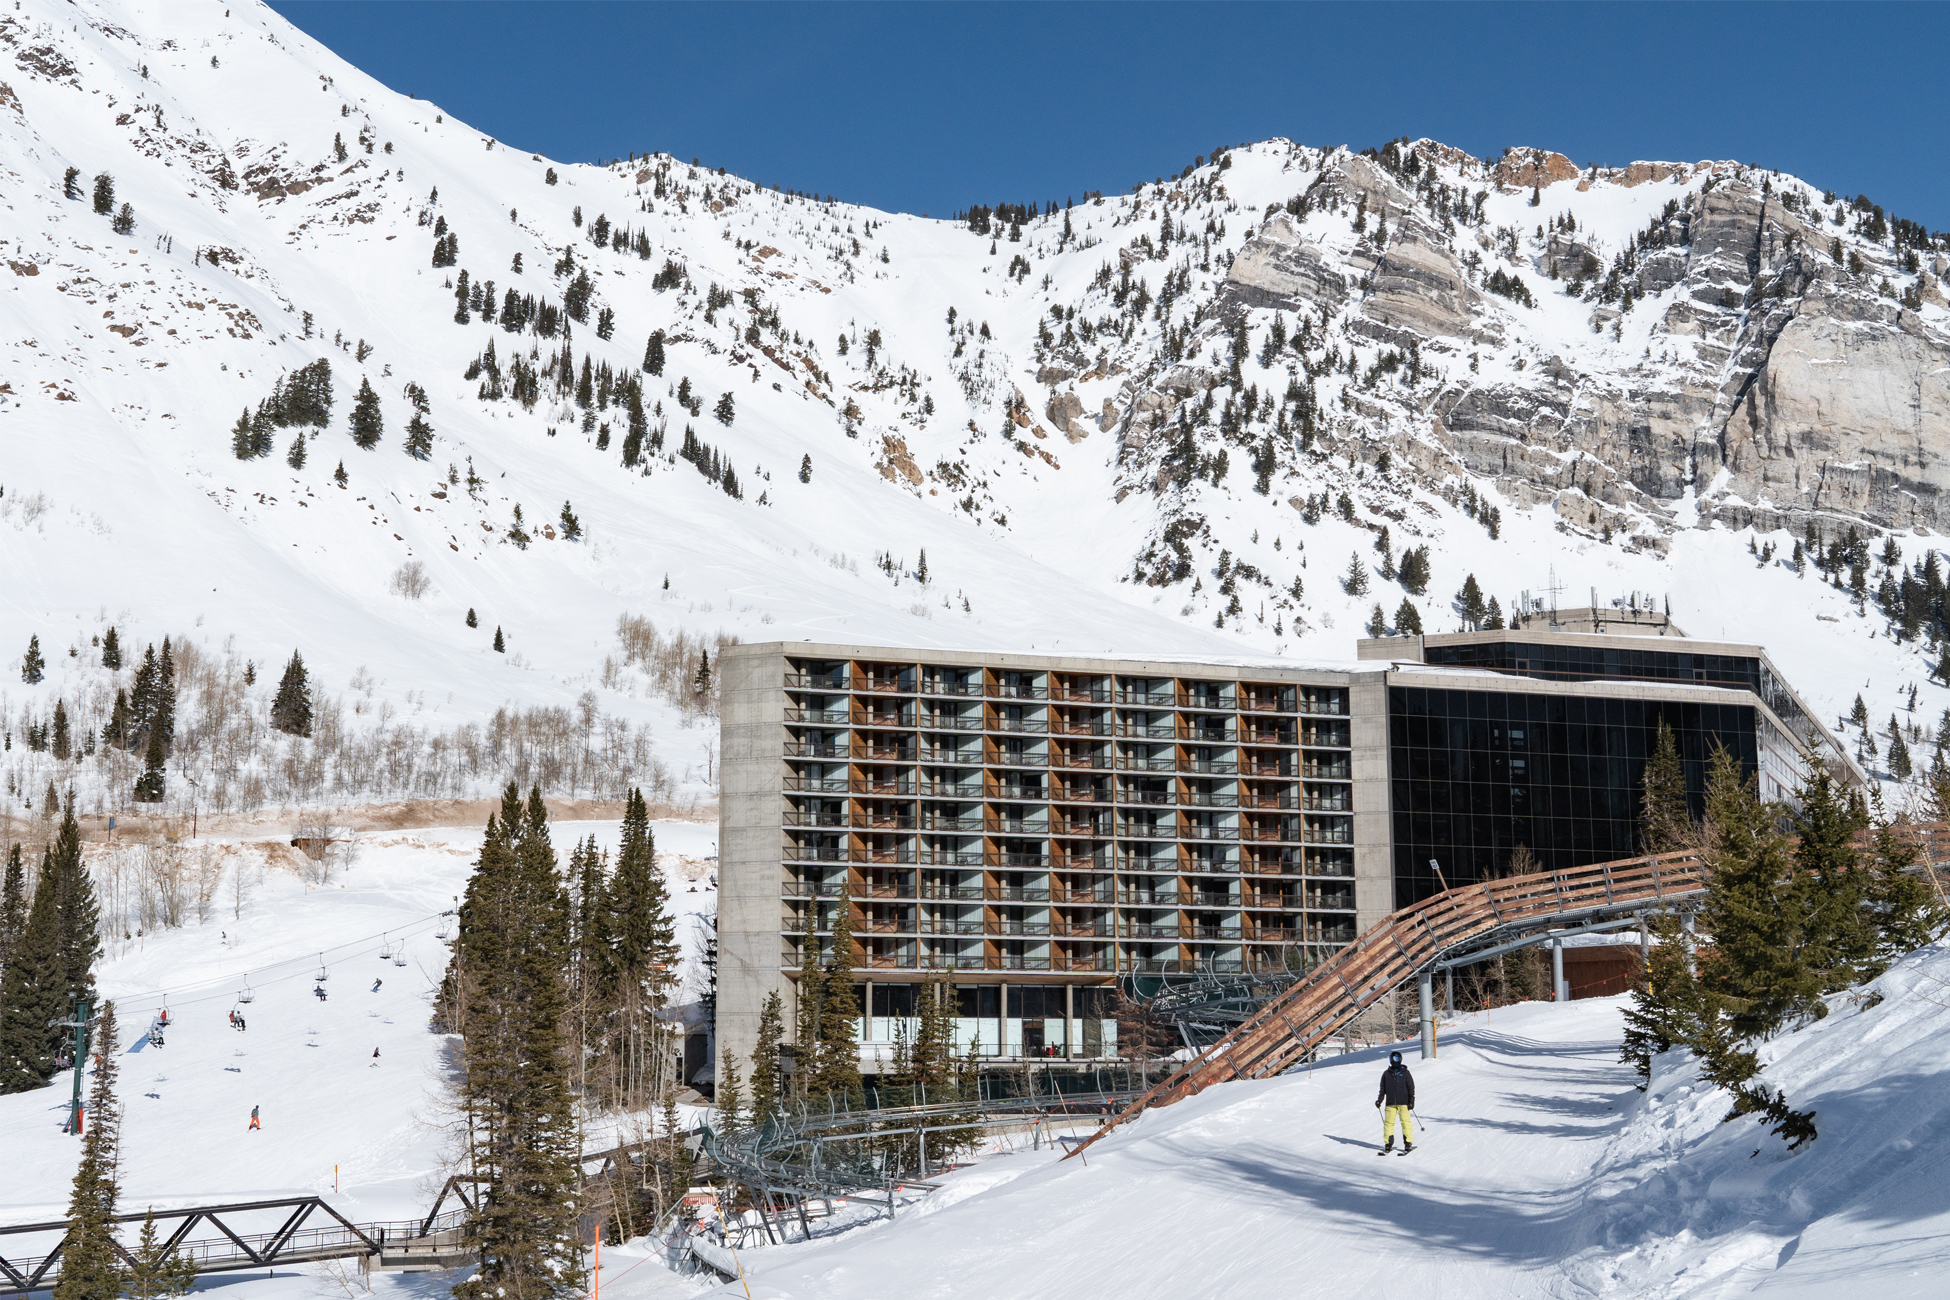 Snowbird First Timer lodging Guide to The Cliff Lodge